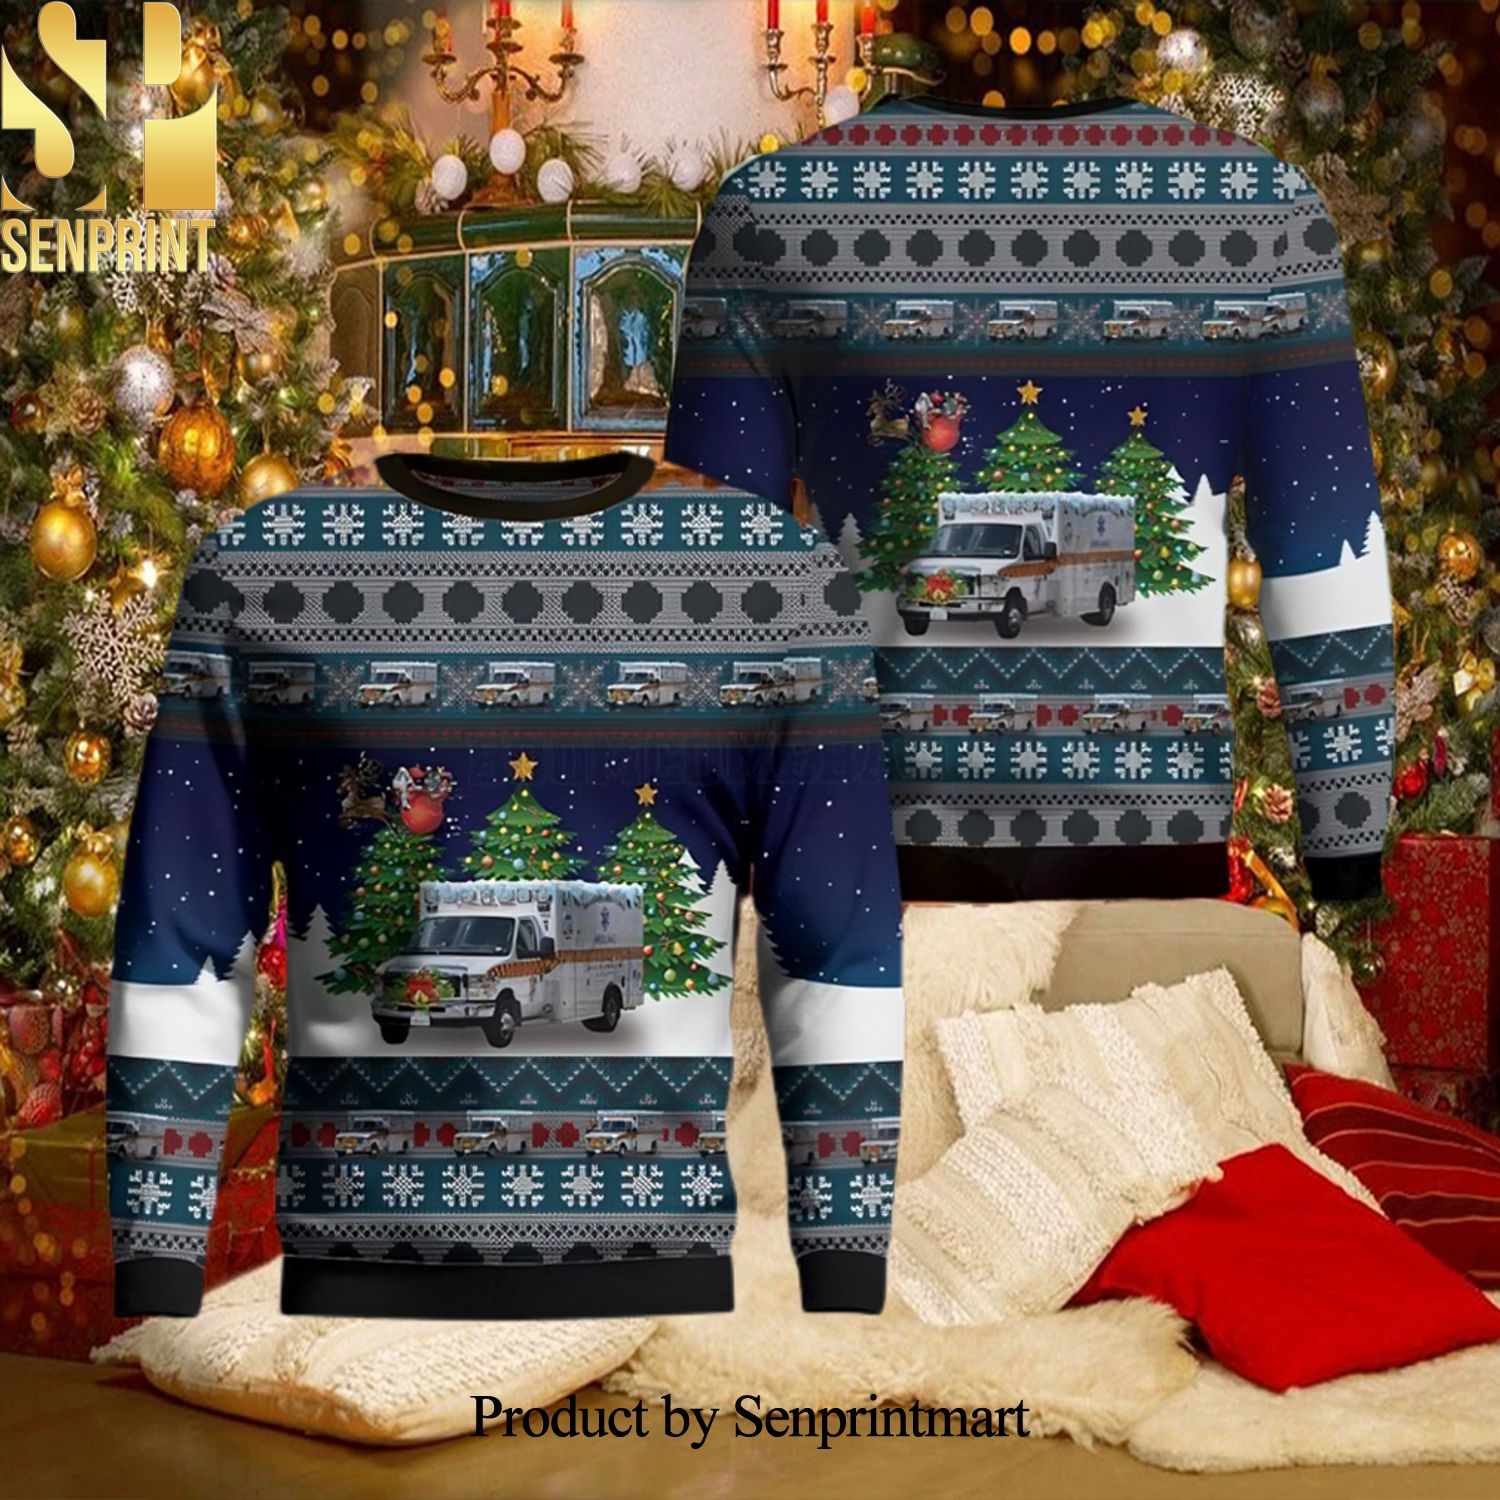 Durham New Hampshire McGregor Memorial EMS Ugly Christmas Wool Knitted Sweater